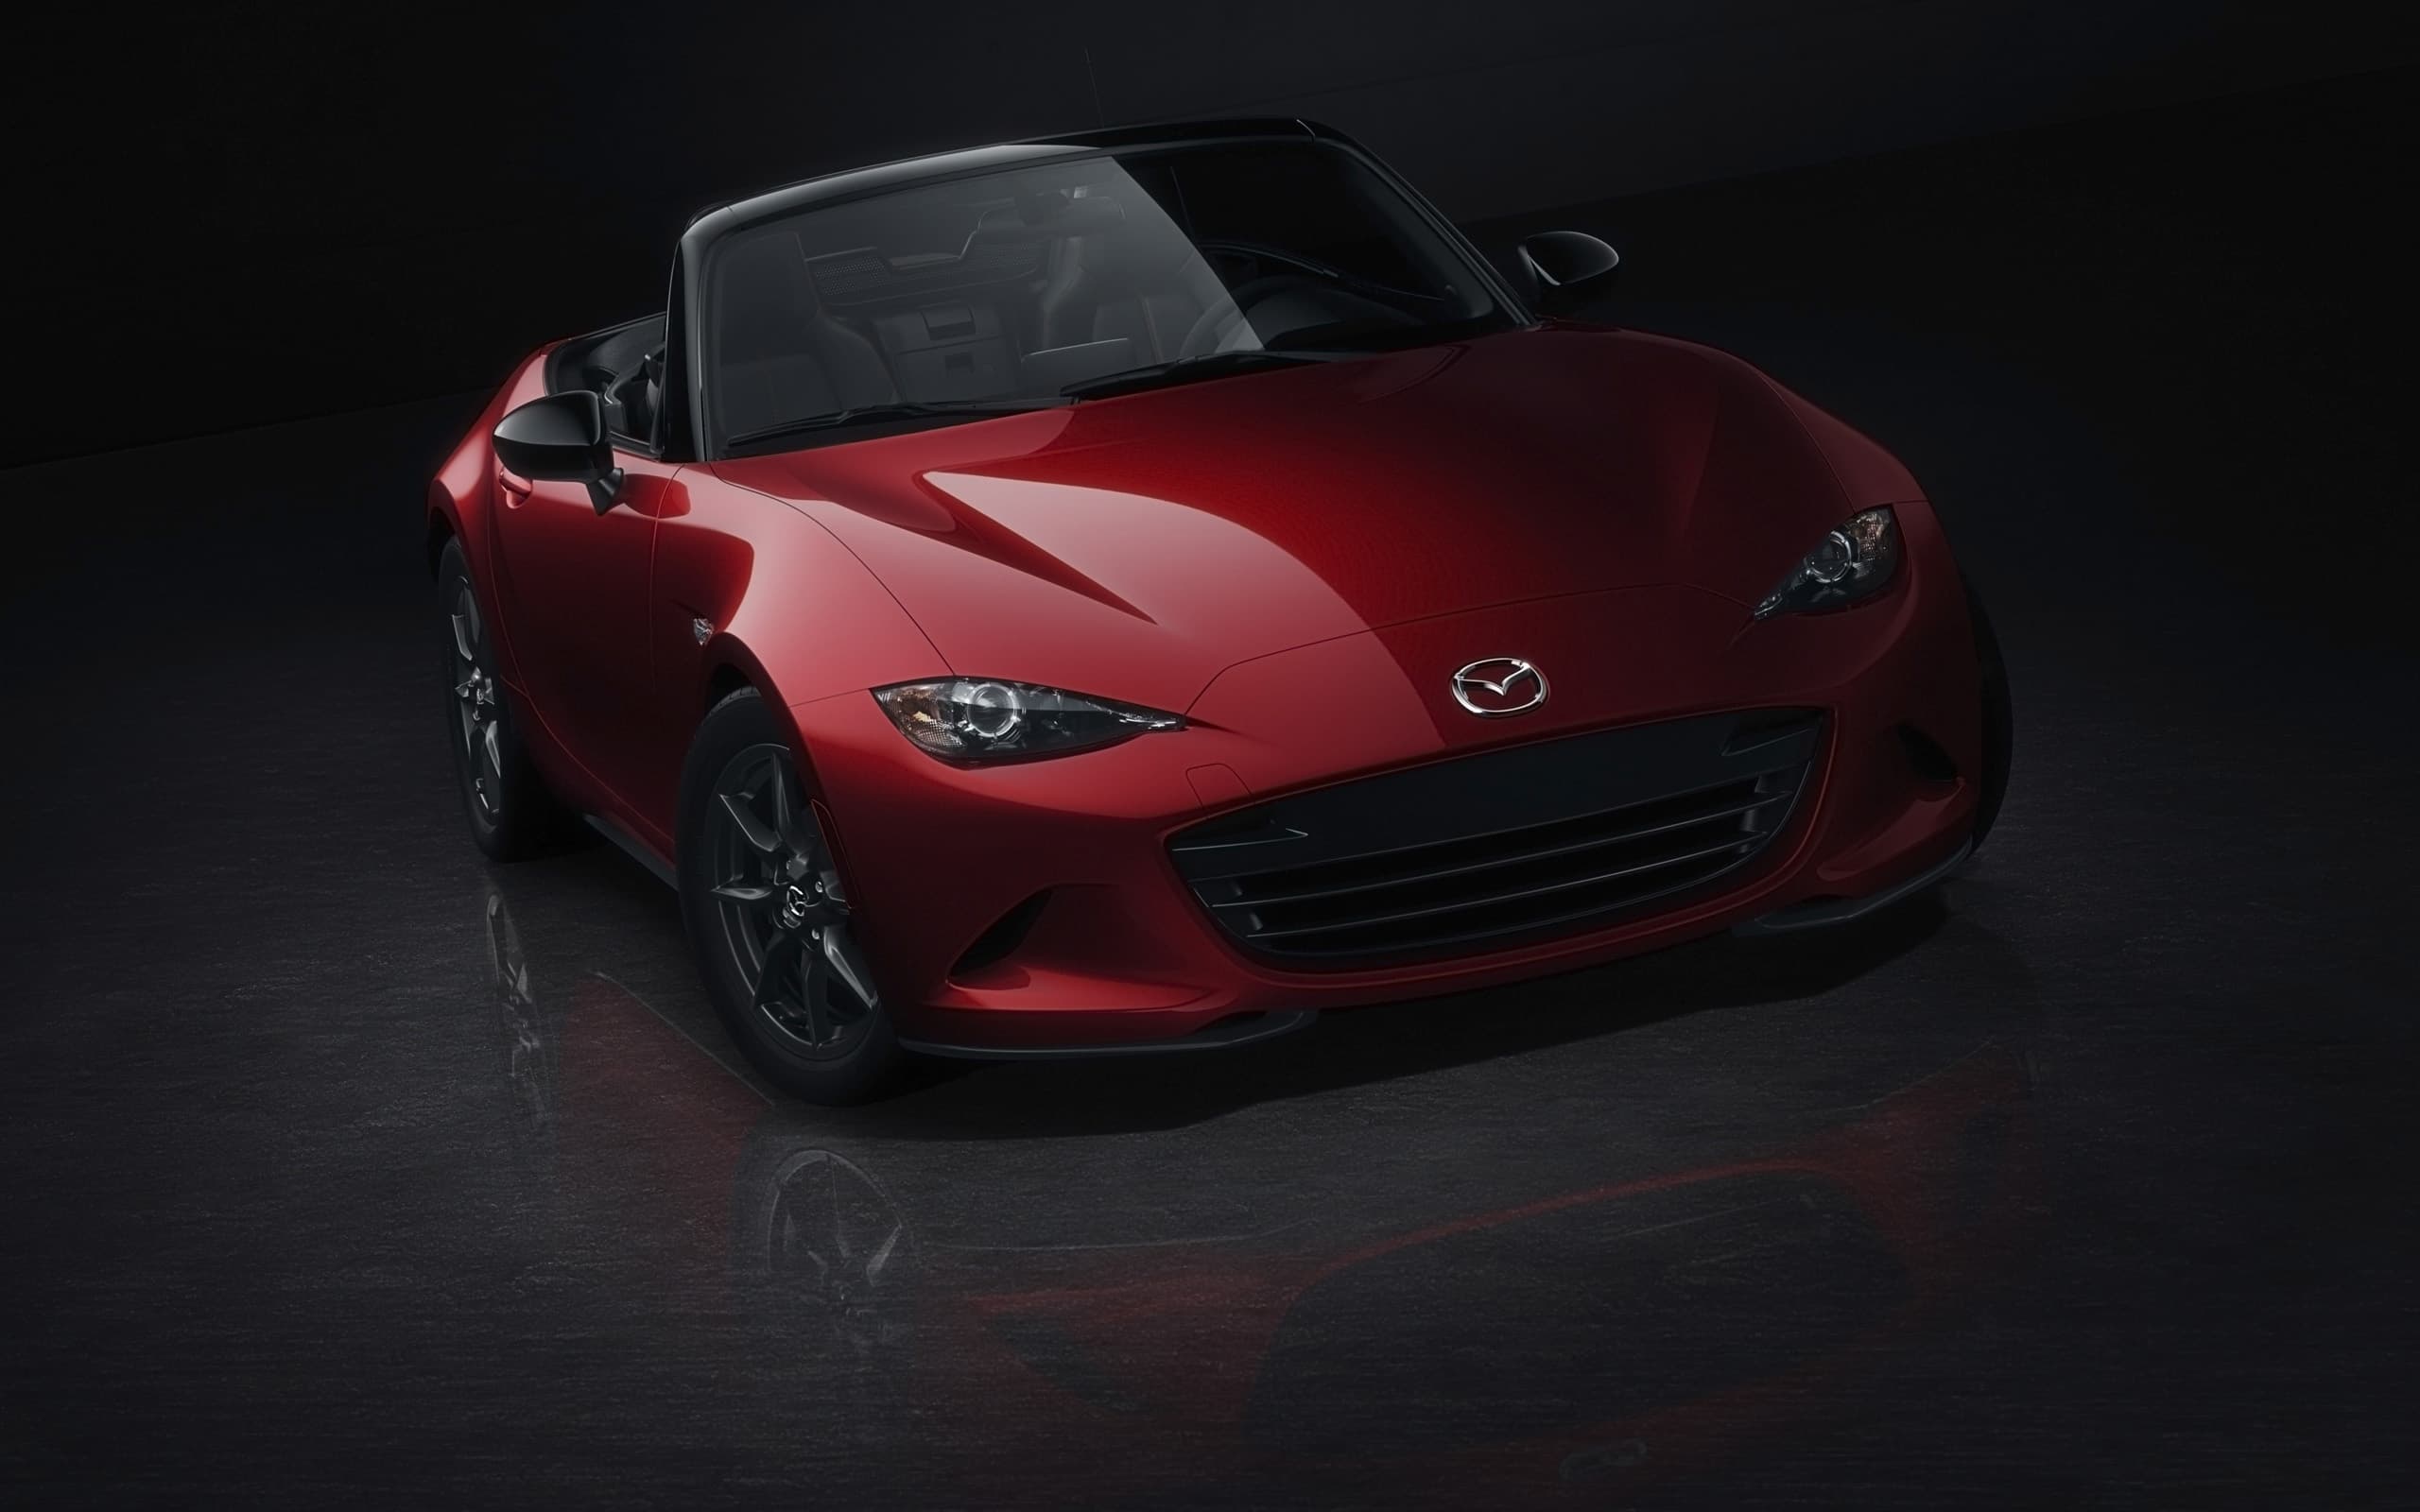 Free Download 2016 Mazda Mx 5 Miata Wallpapers High Quality Resolution 2560x1600 For Your Desktop Mobile Tablet Explore 100 Mazda Miata Wallpapers Mazda Miata Wallpapers Mazda Miata Wallpaper 2016 Mazda Mx5 Miata Wallpaper